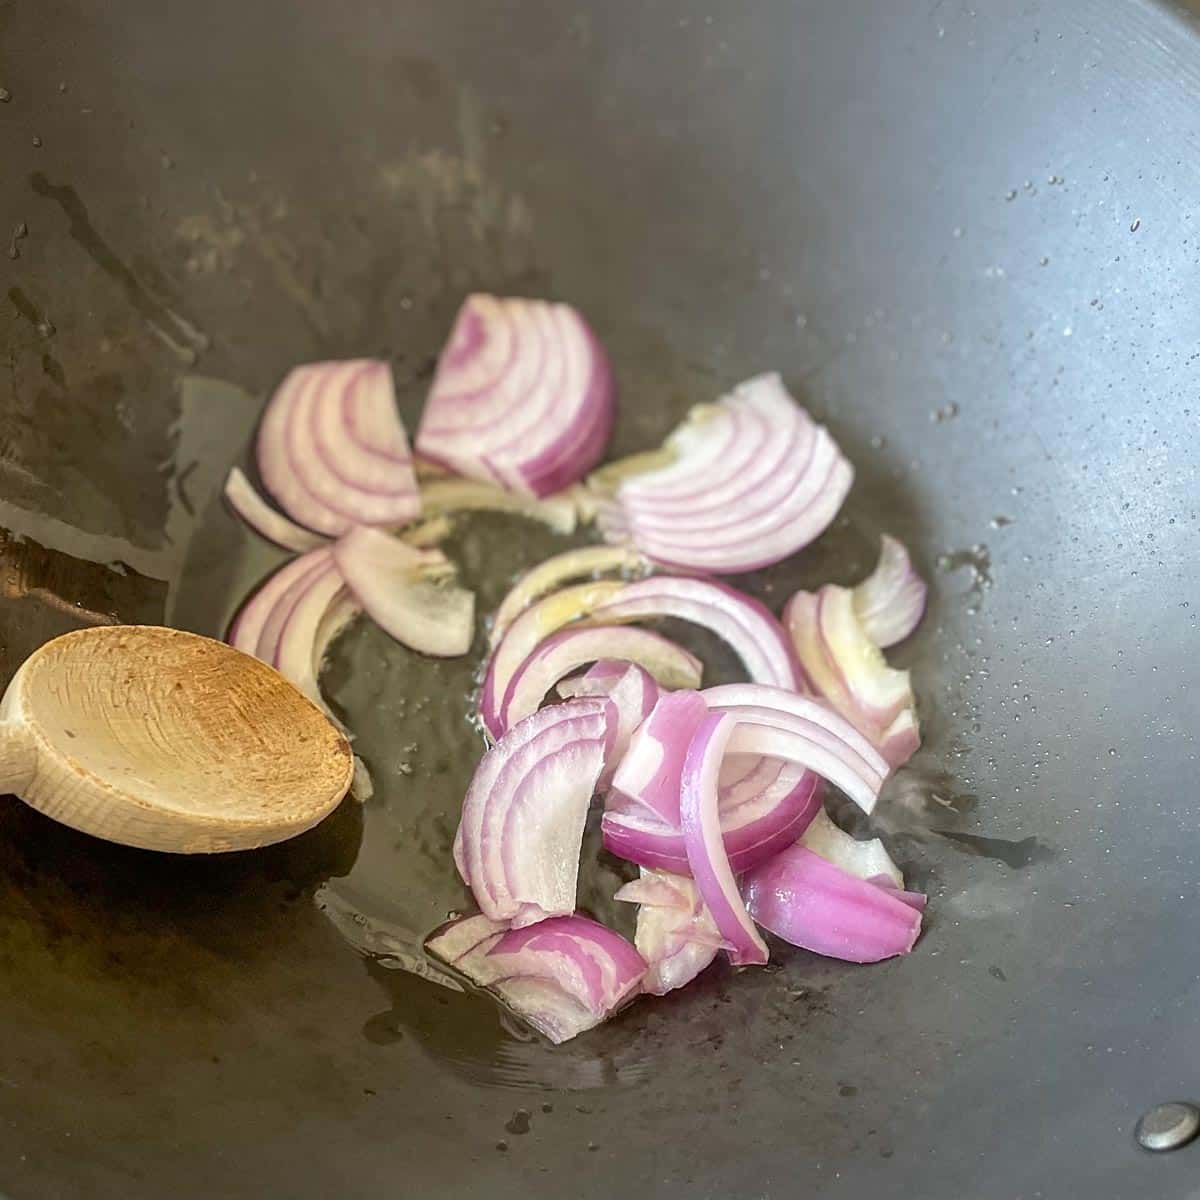 Onion is cooked in a wok.